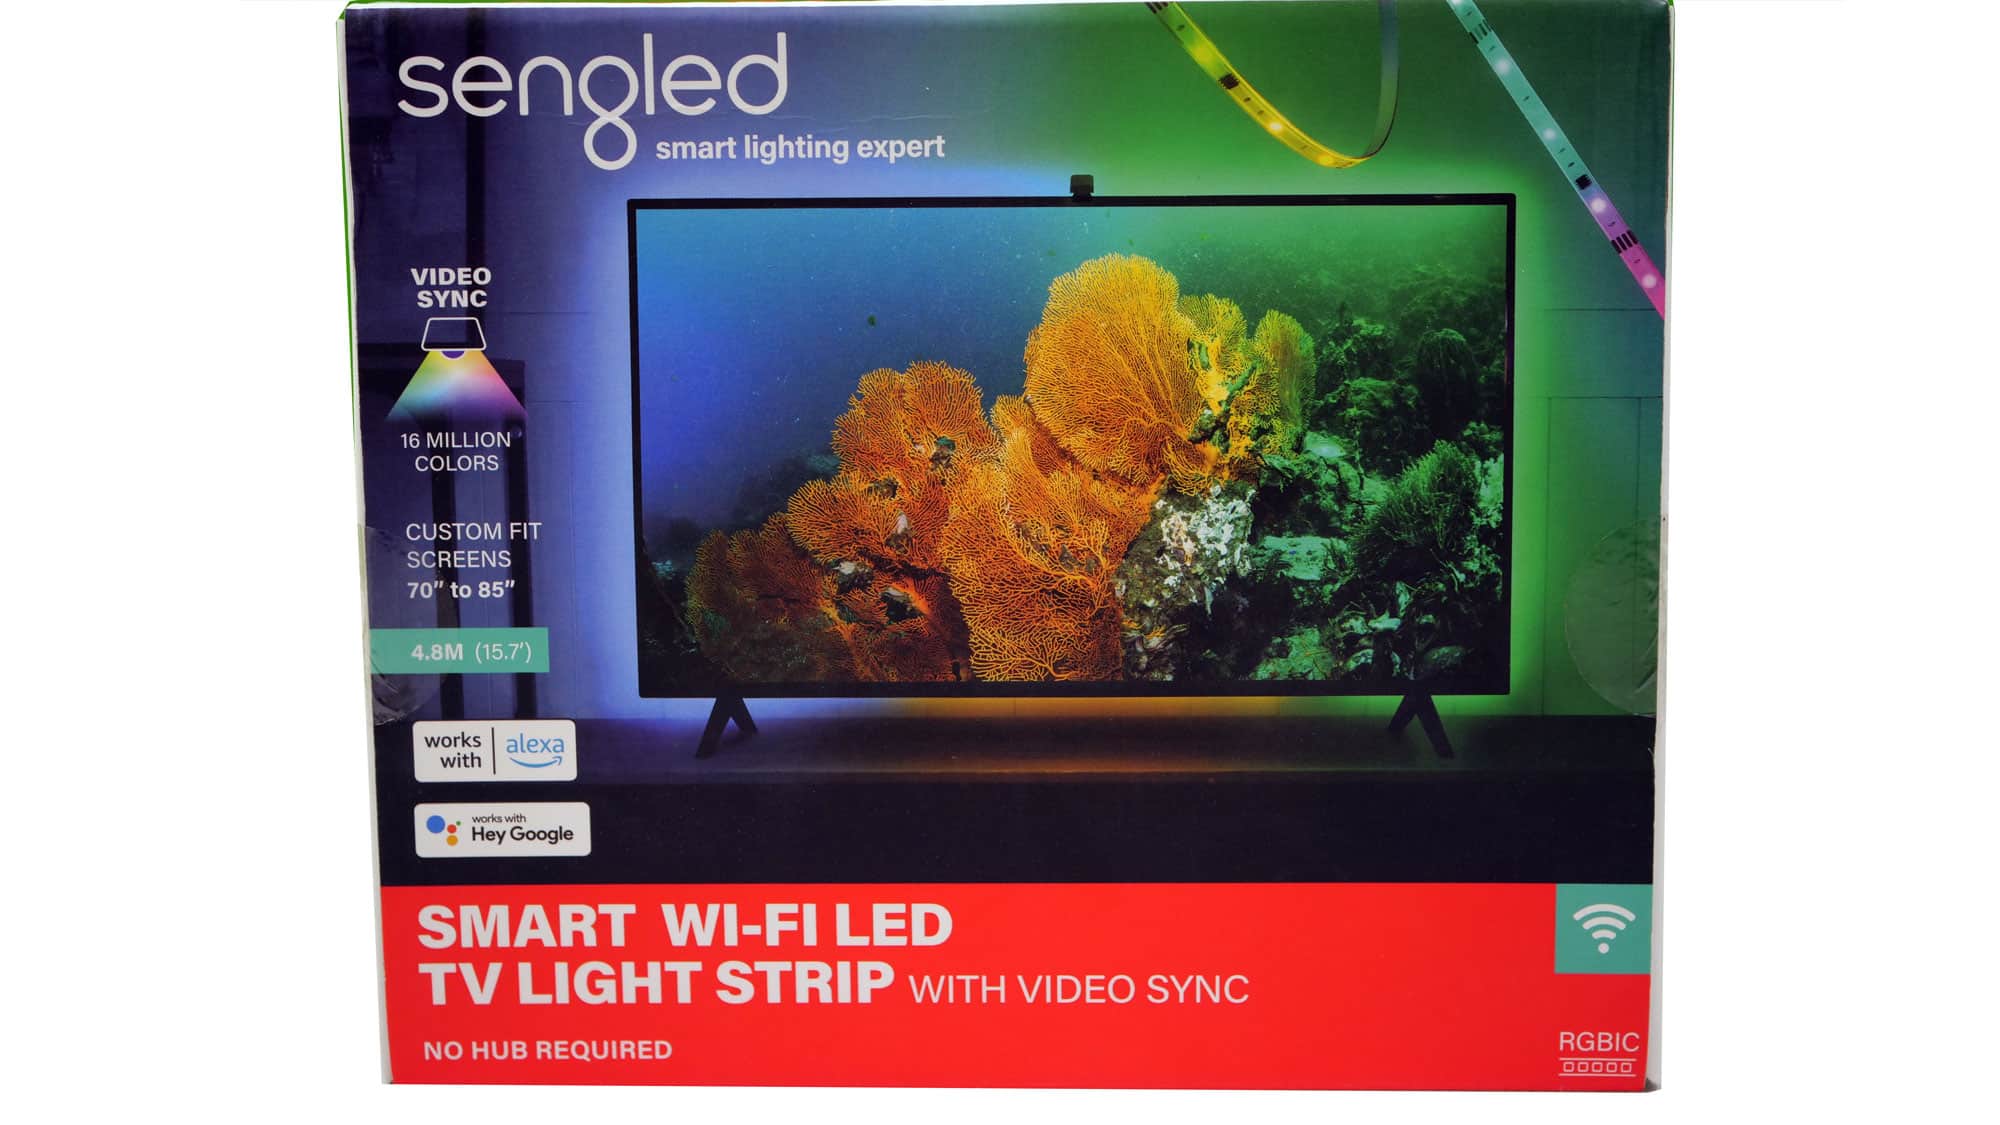 Sengled wins CES 2022 for me with this LED TV light strip